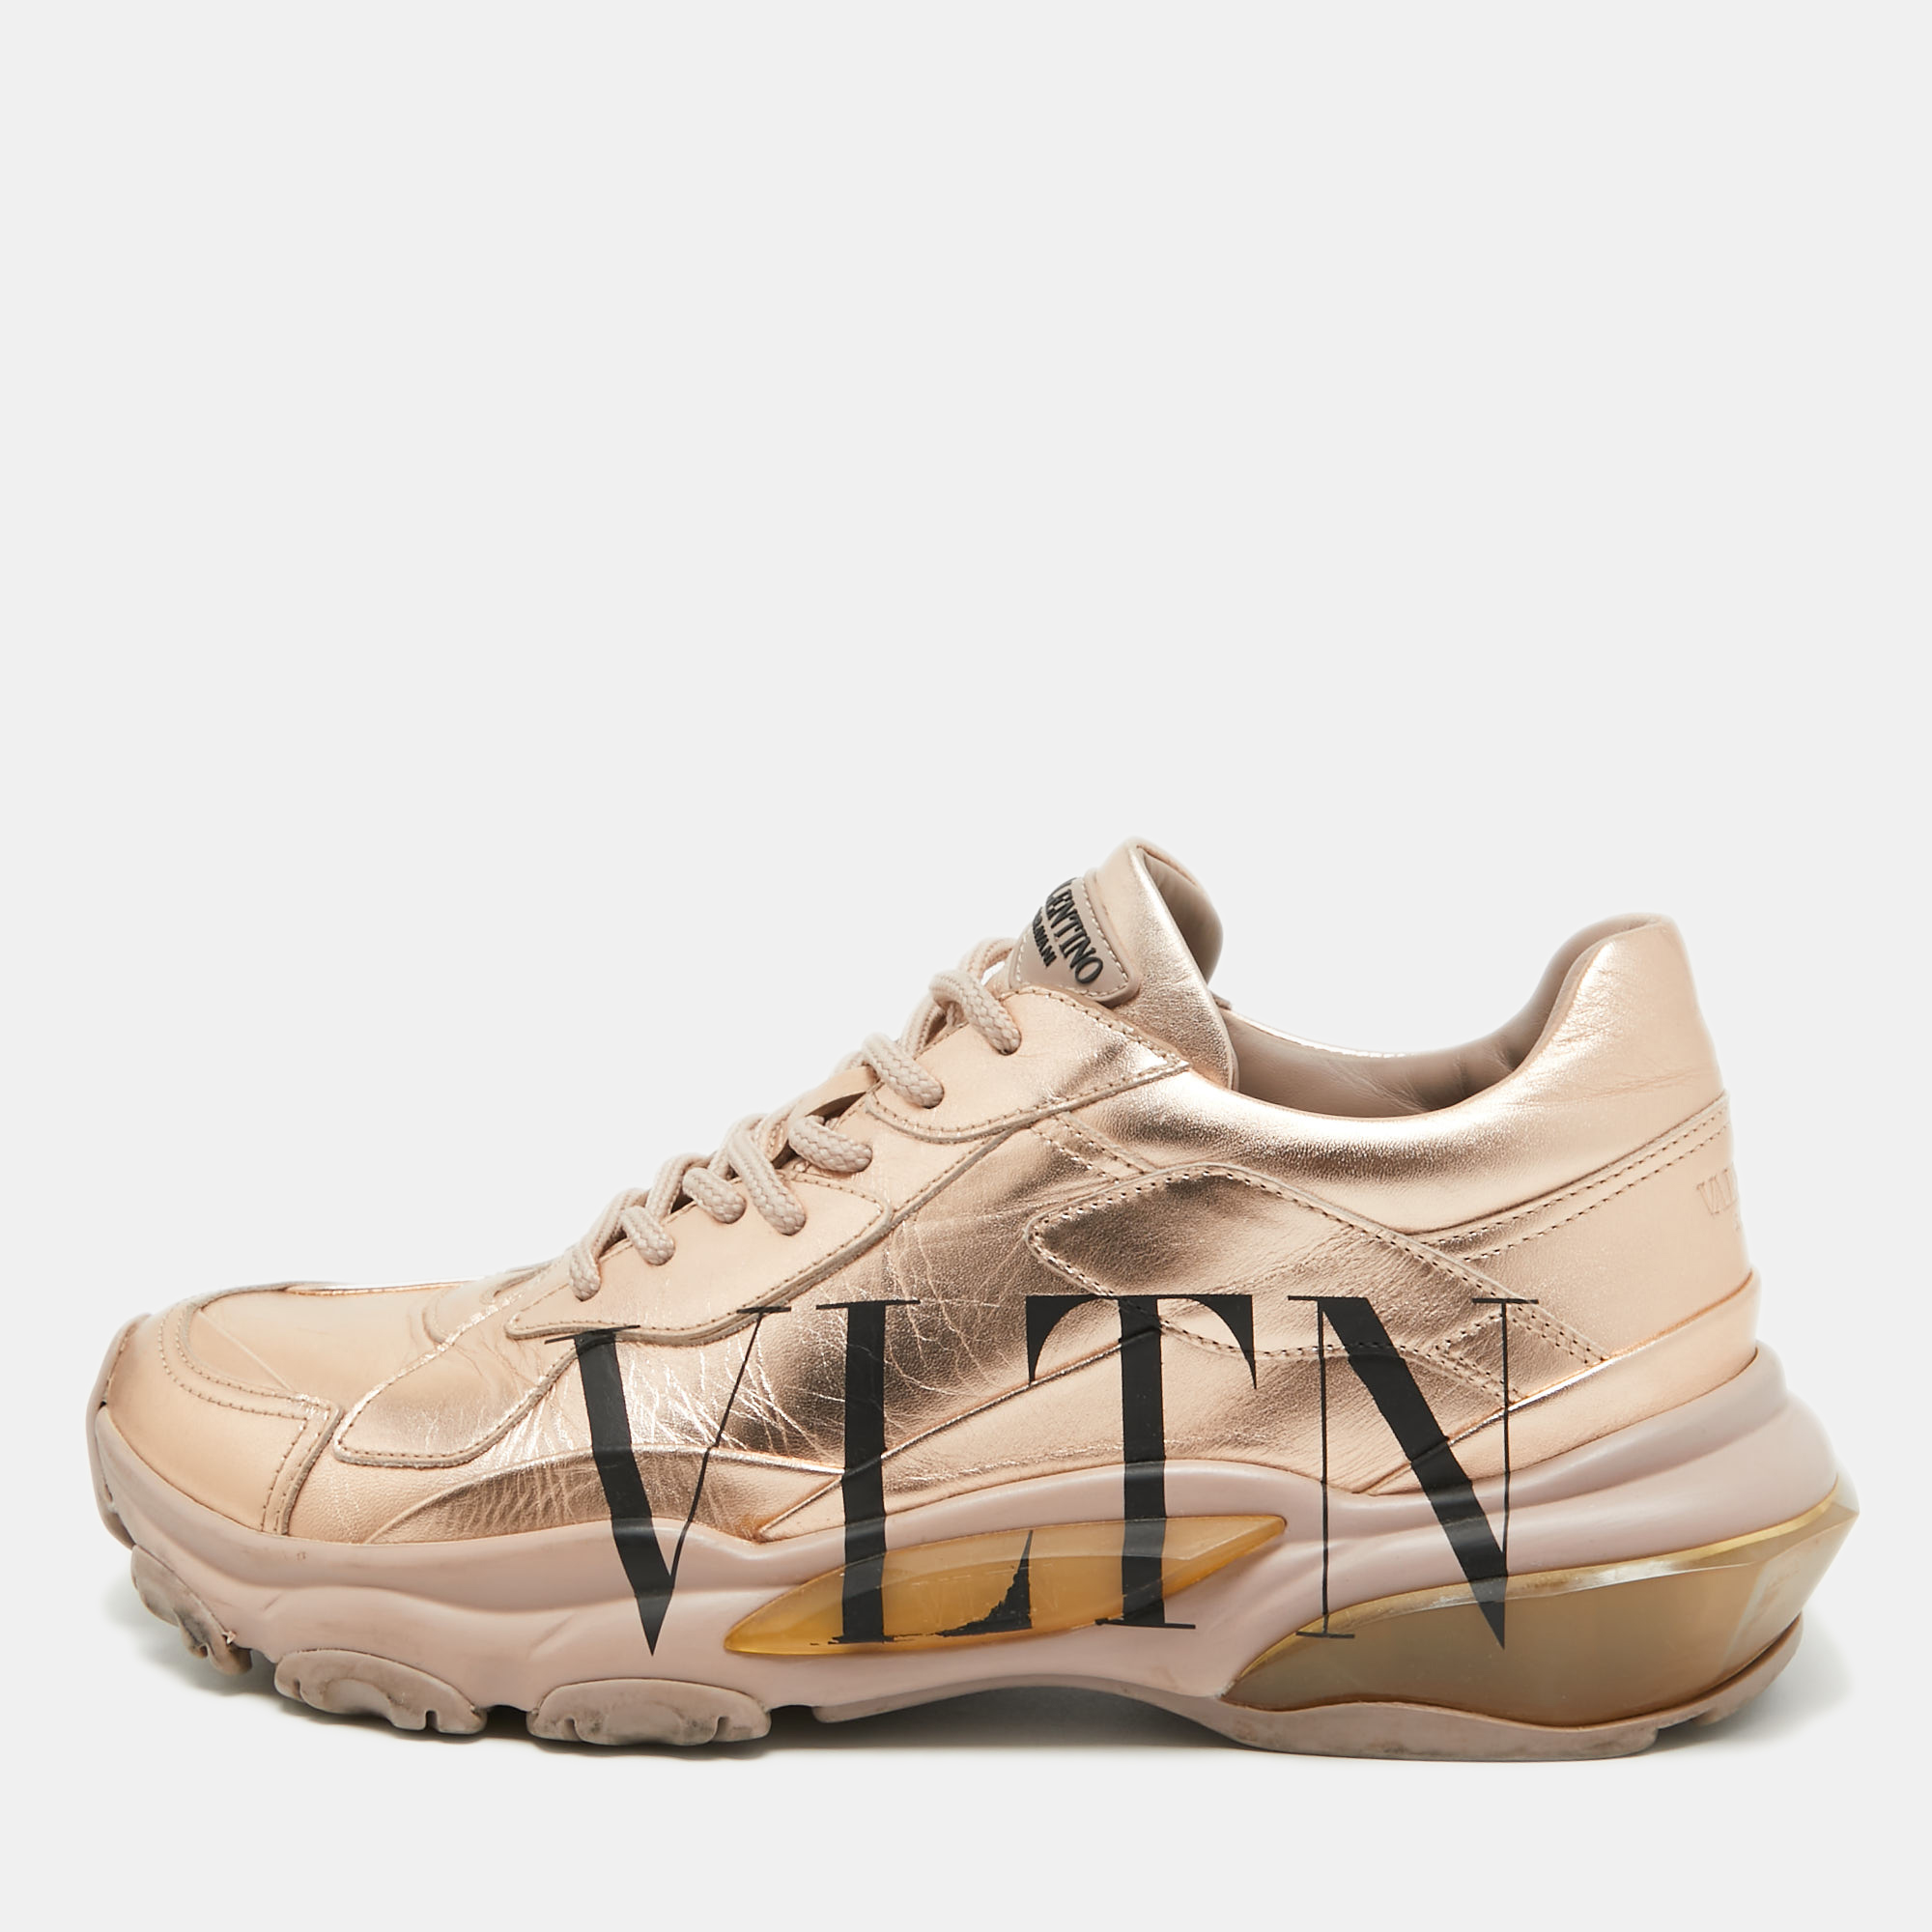 Valentino Rose Gold Leather VLTN Print Bounce Sneakers Size 40